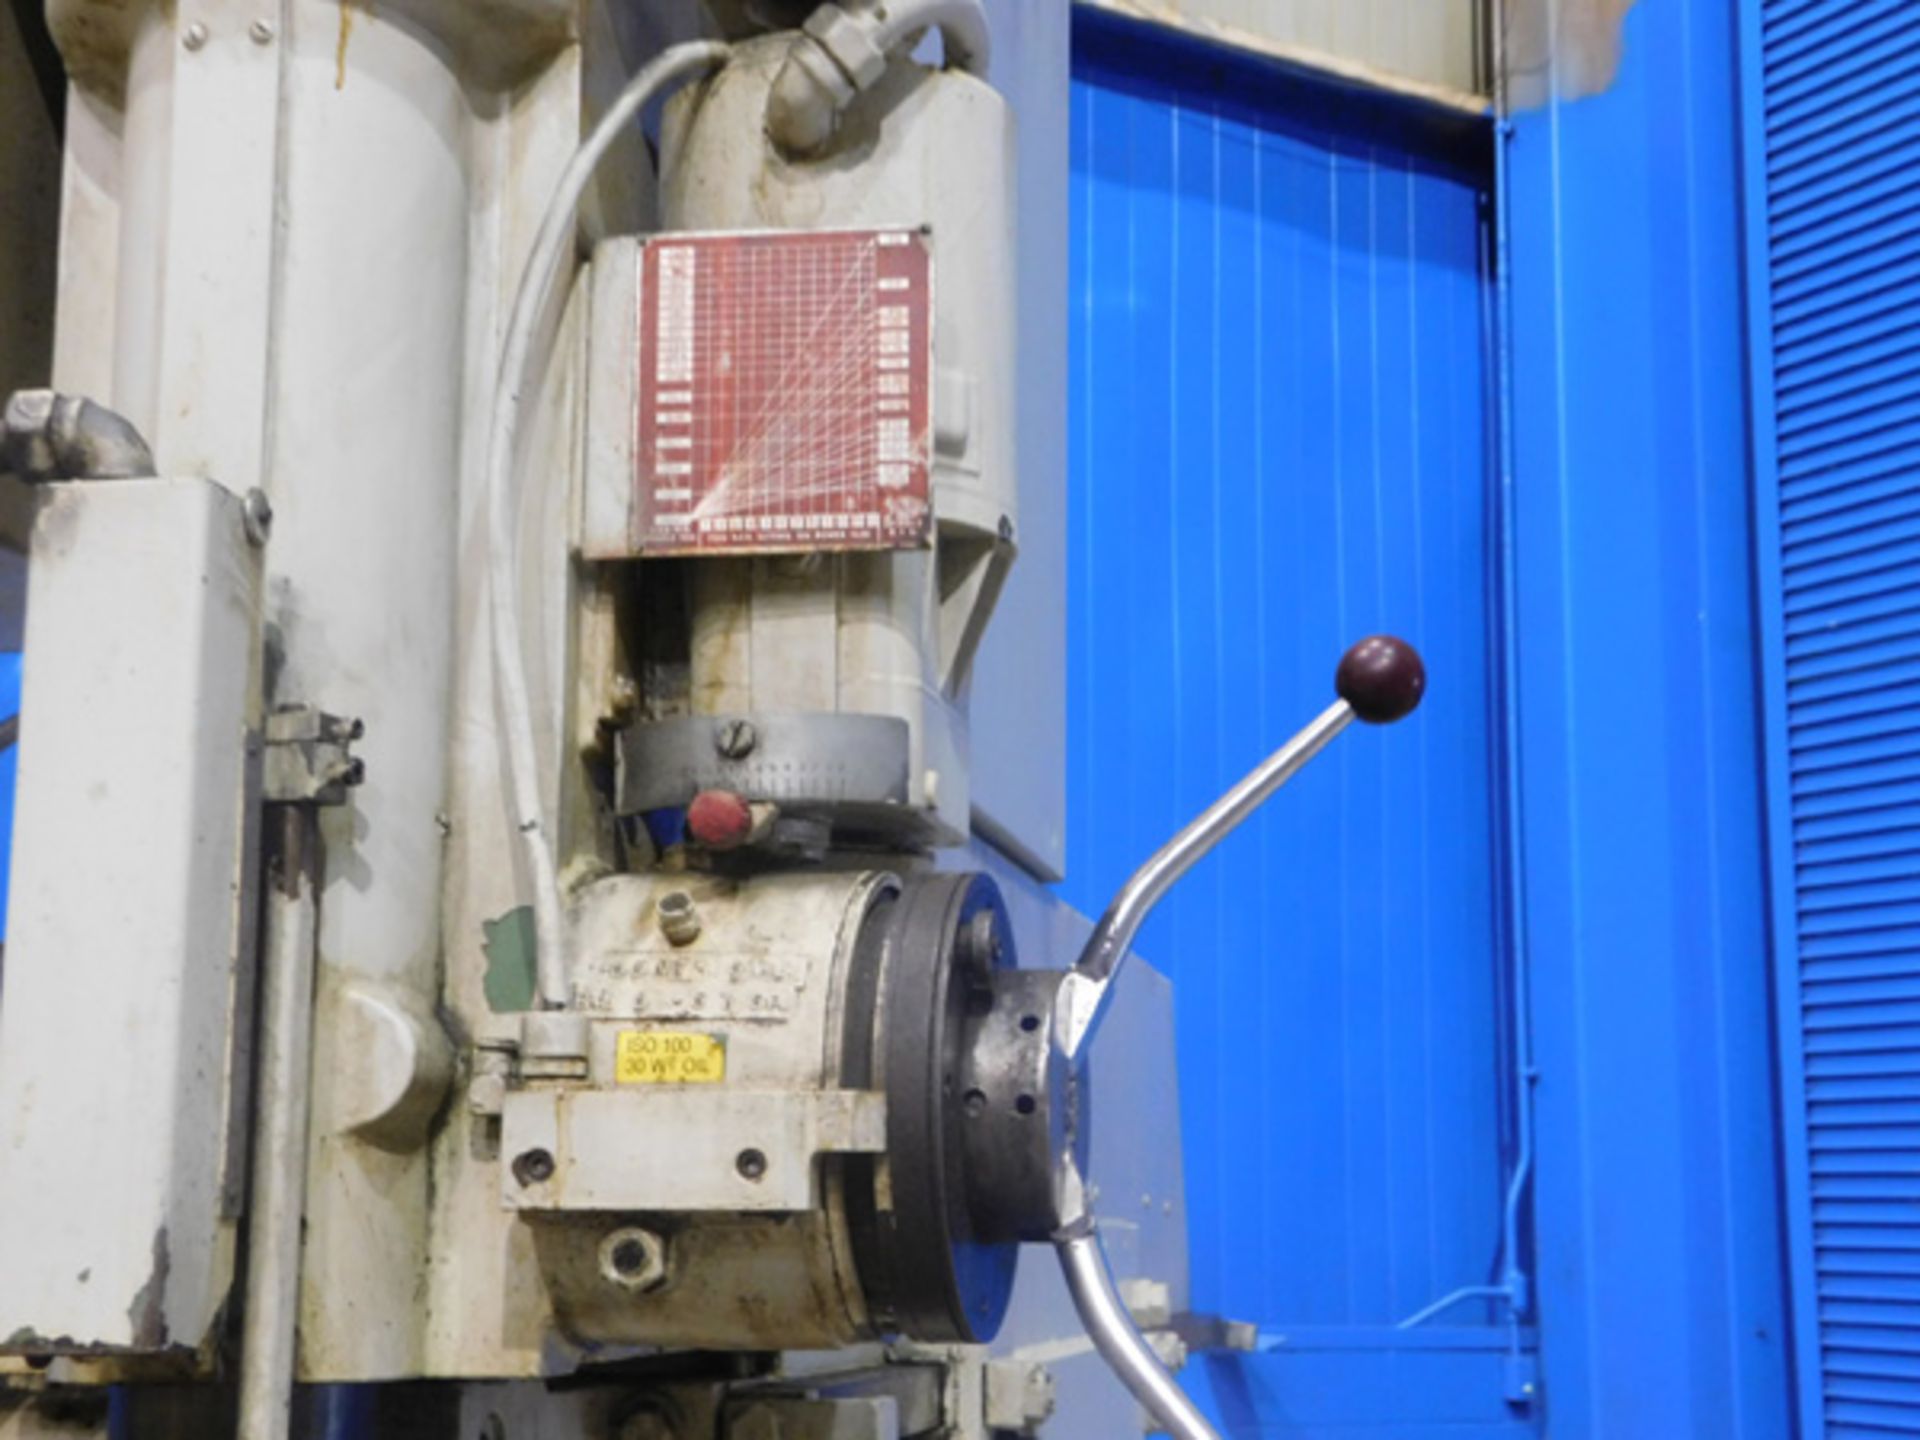 Johansson Radial Arm Drill | 3' x 11", Mdl: N/A, S/N: 51621 - 6964P - Image 3 of 9